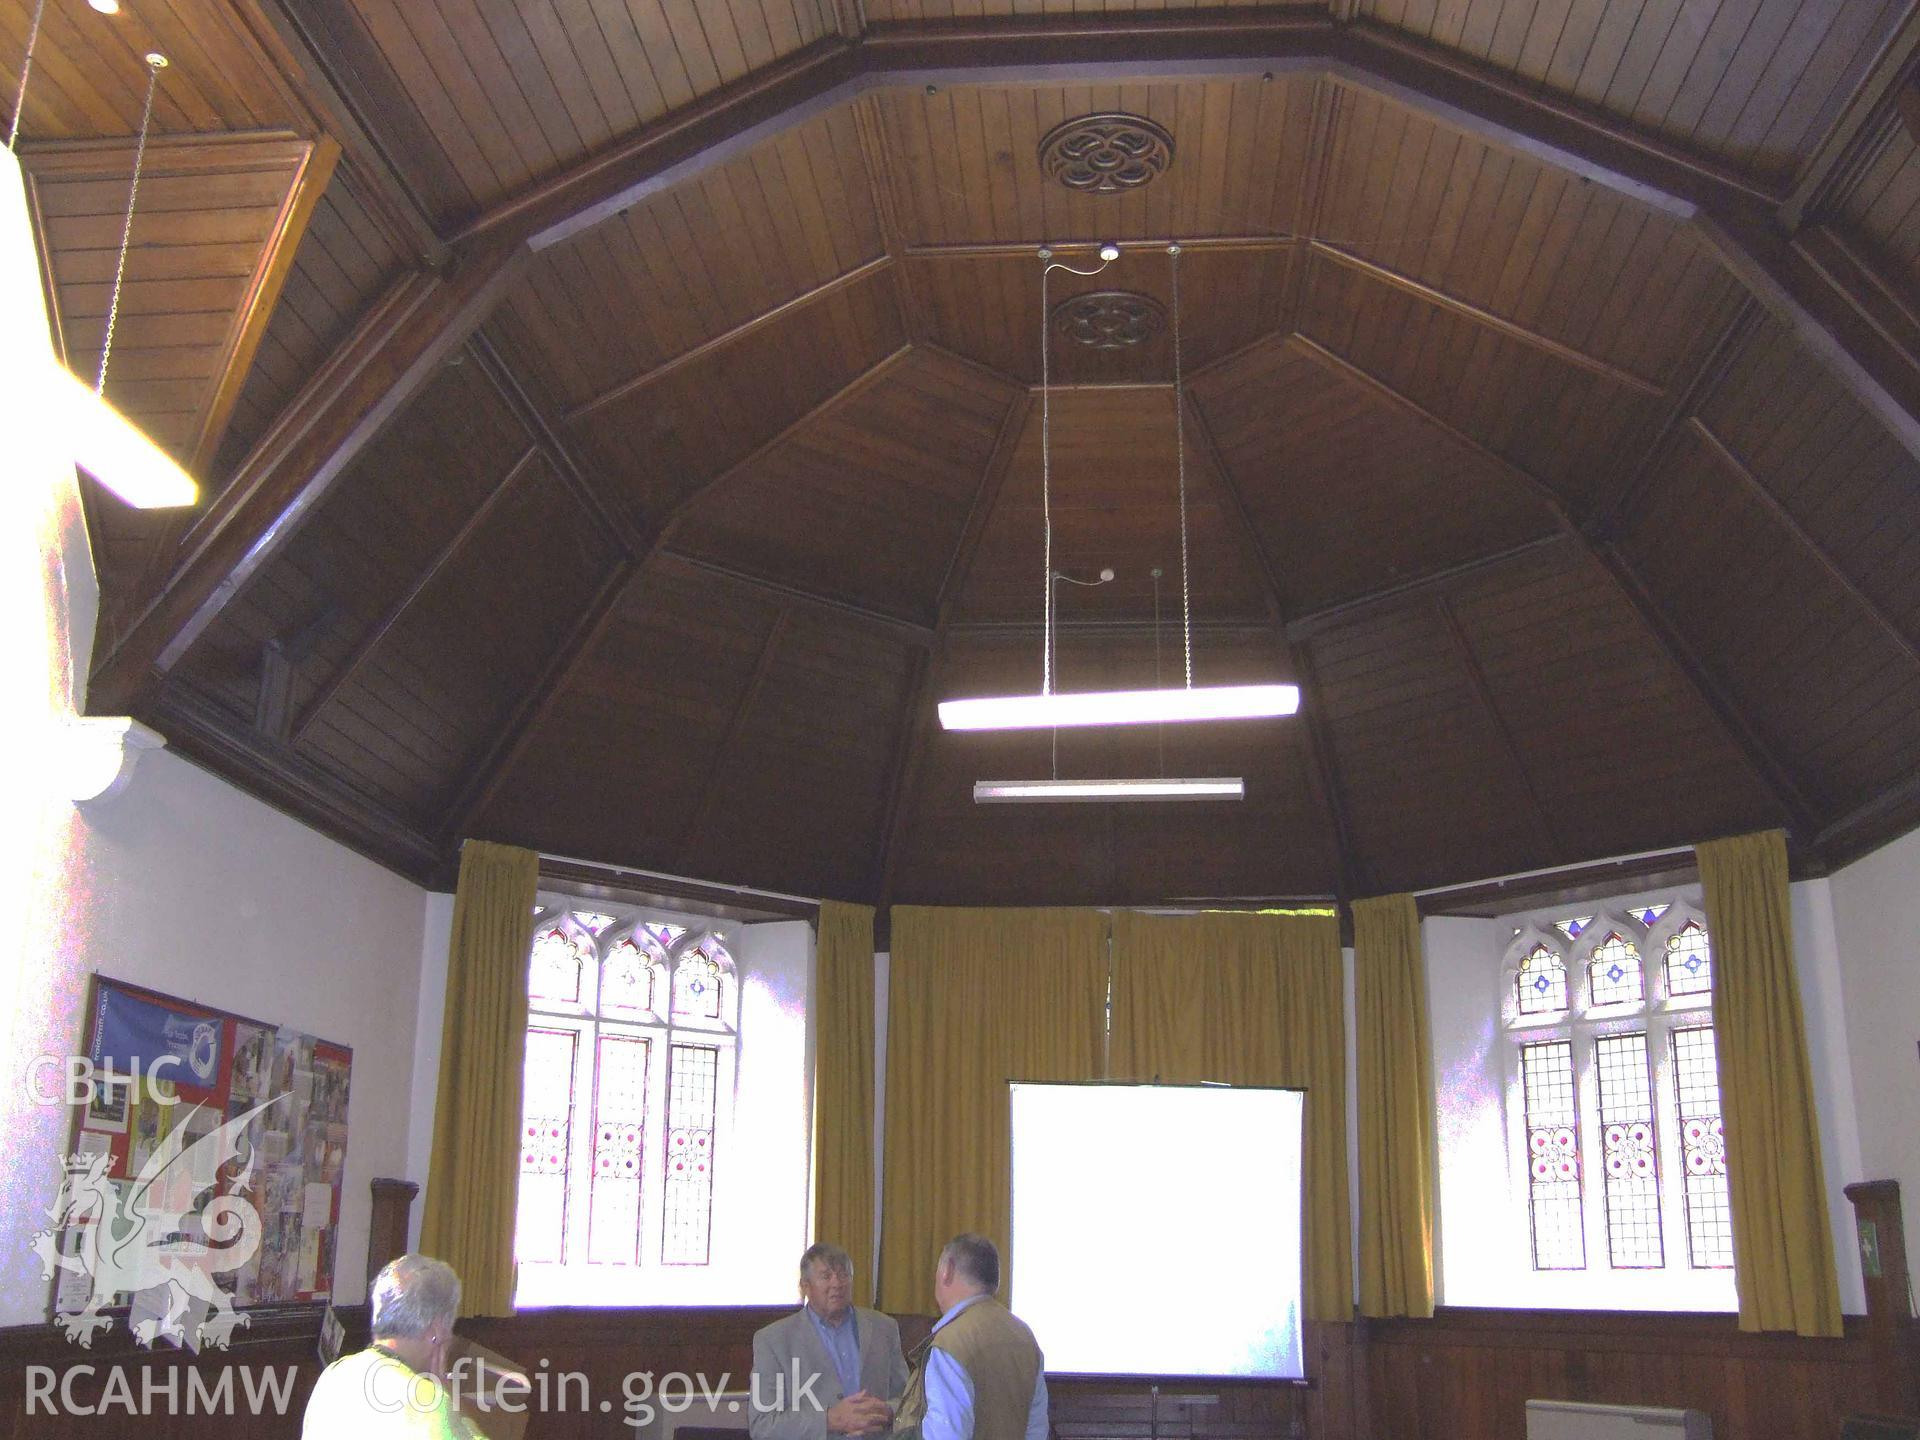 Sunday School Room used for Capel meeting looking NW.